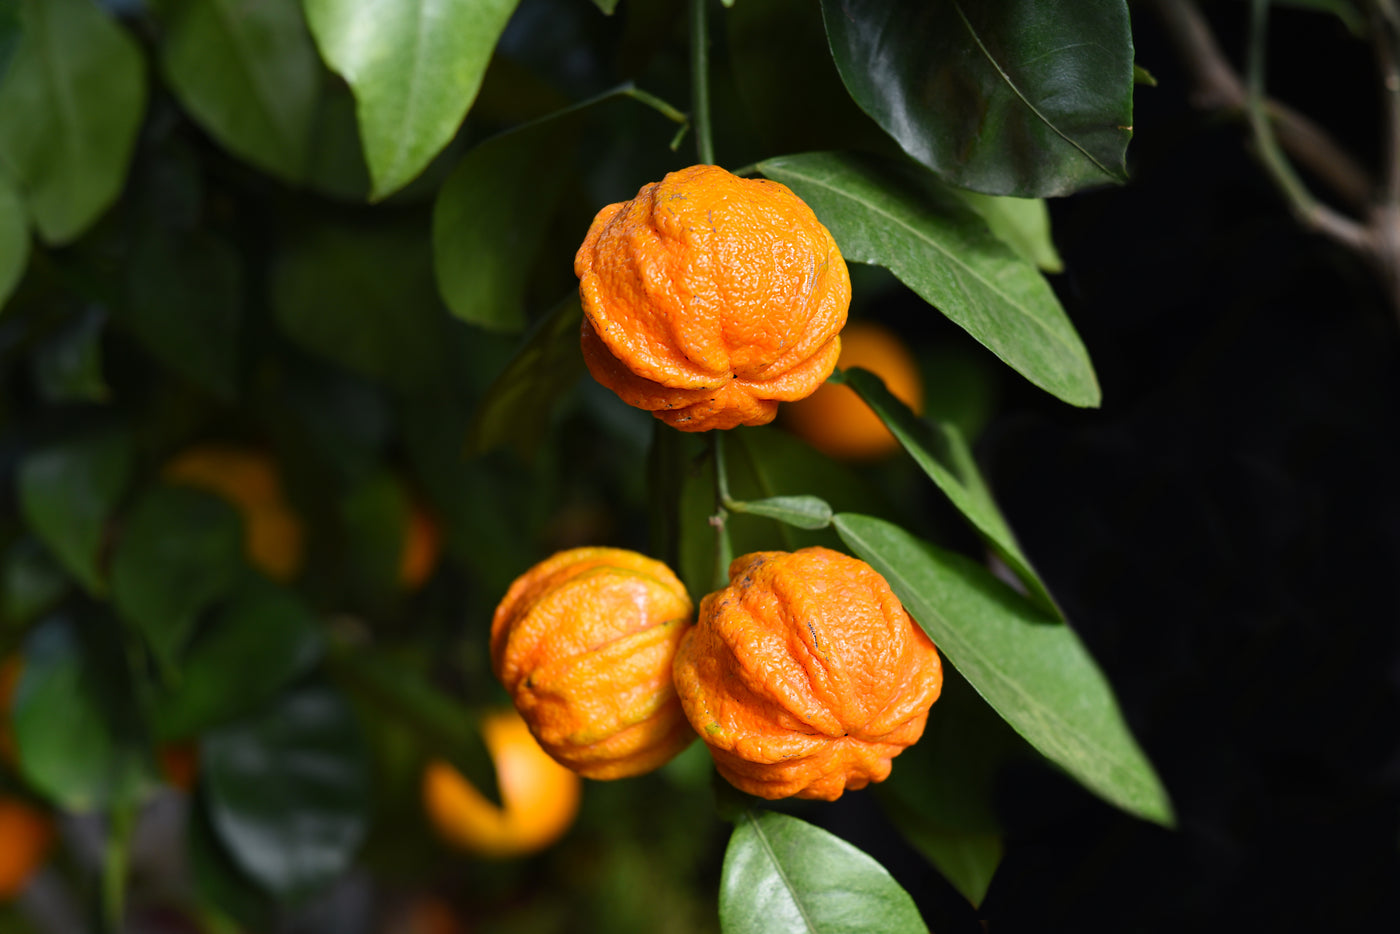 Image of bitter oranges growing on a tree